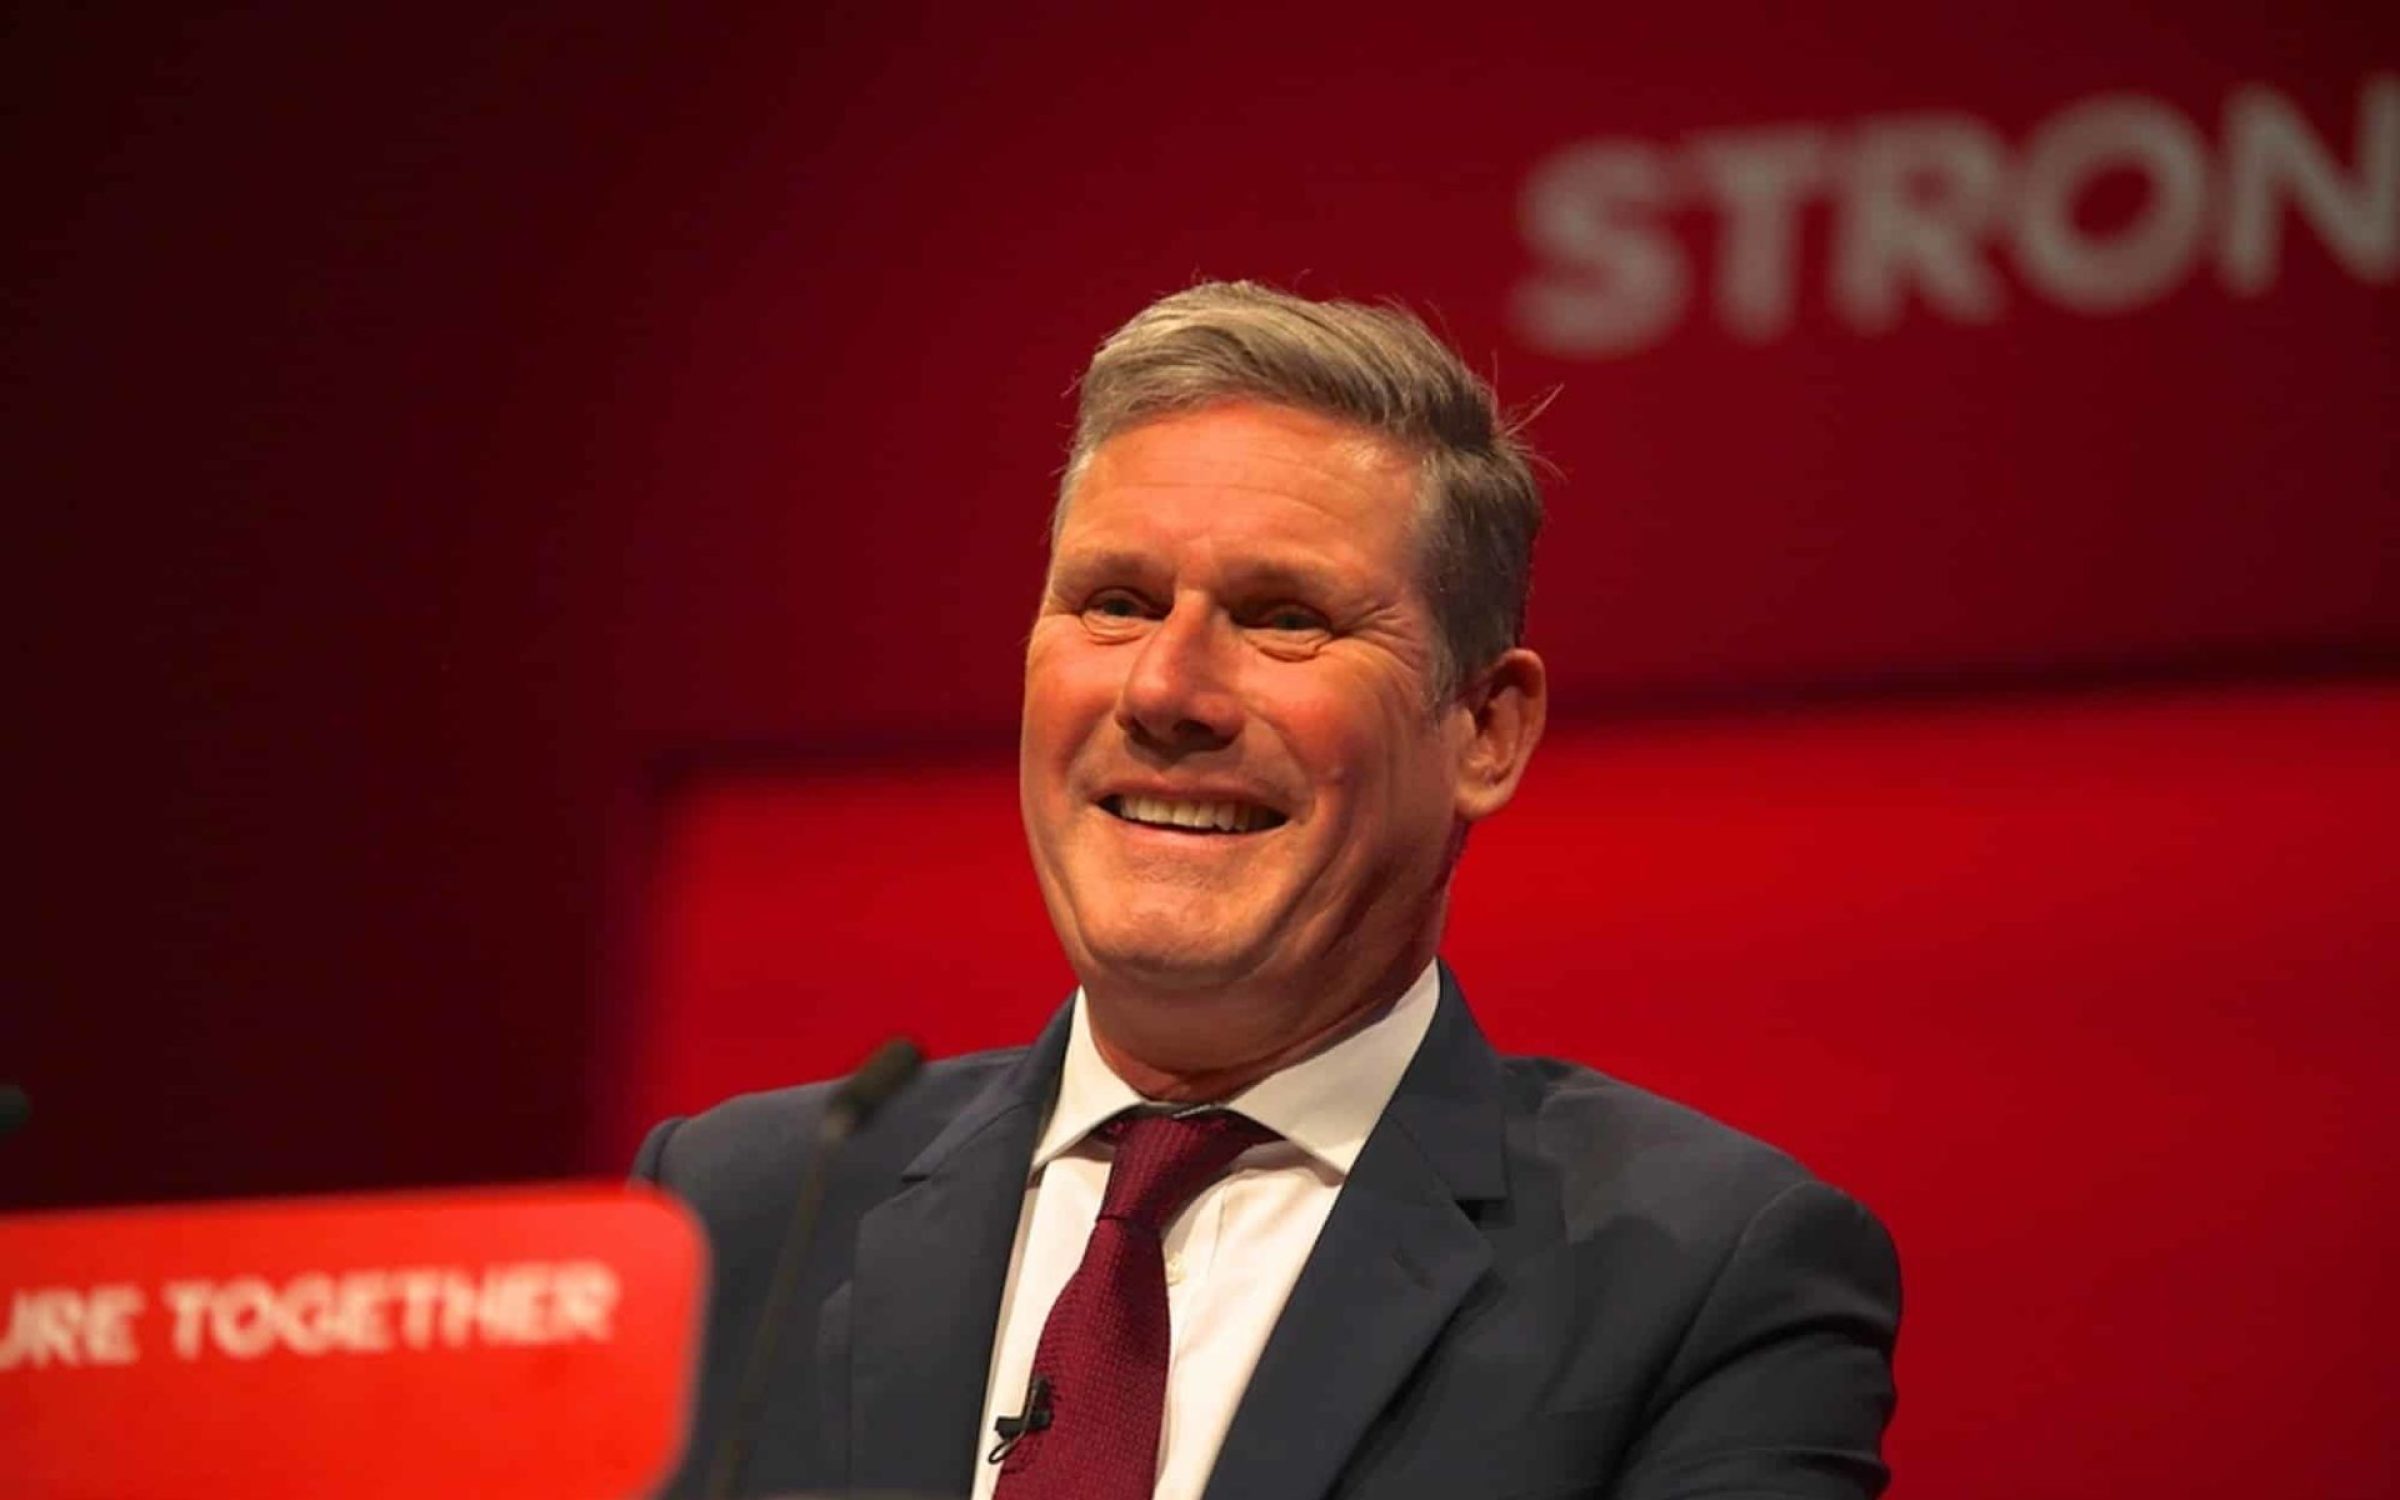 Brighton UK 09 29 2021: Sir Keir Starmer giving his speech to the Labour Party Conference